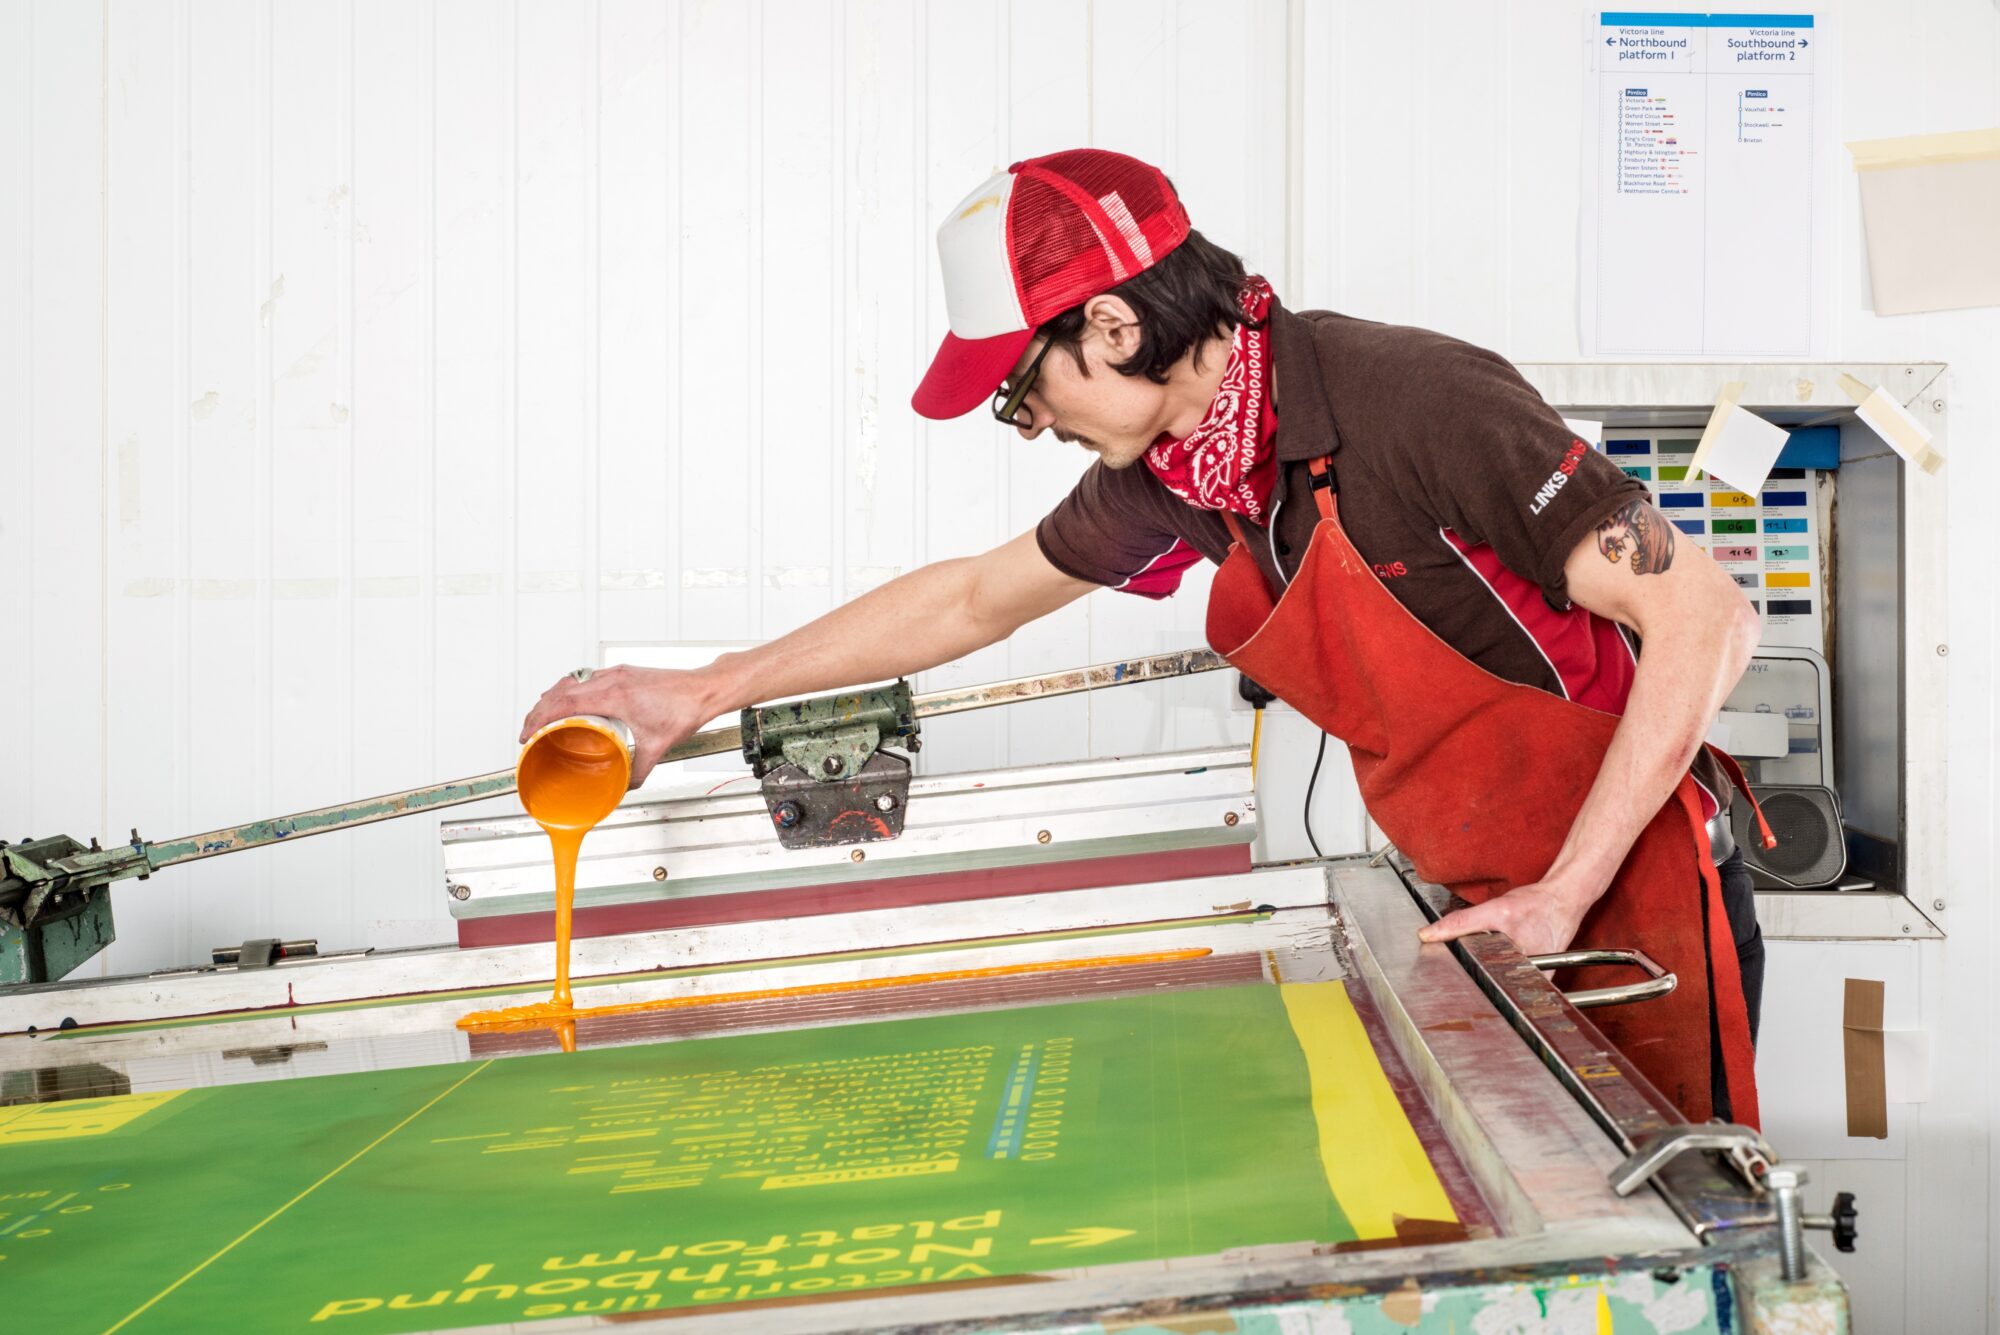 lost art of screen printing, man pouring ink